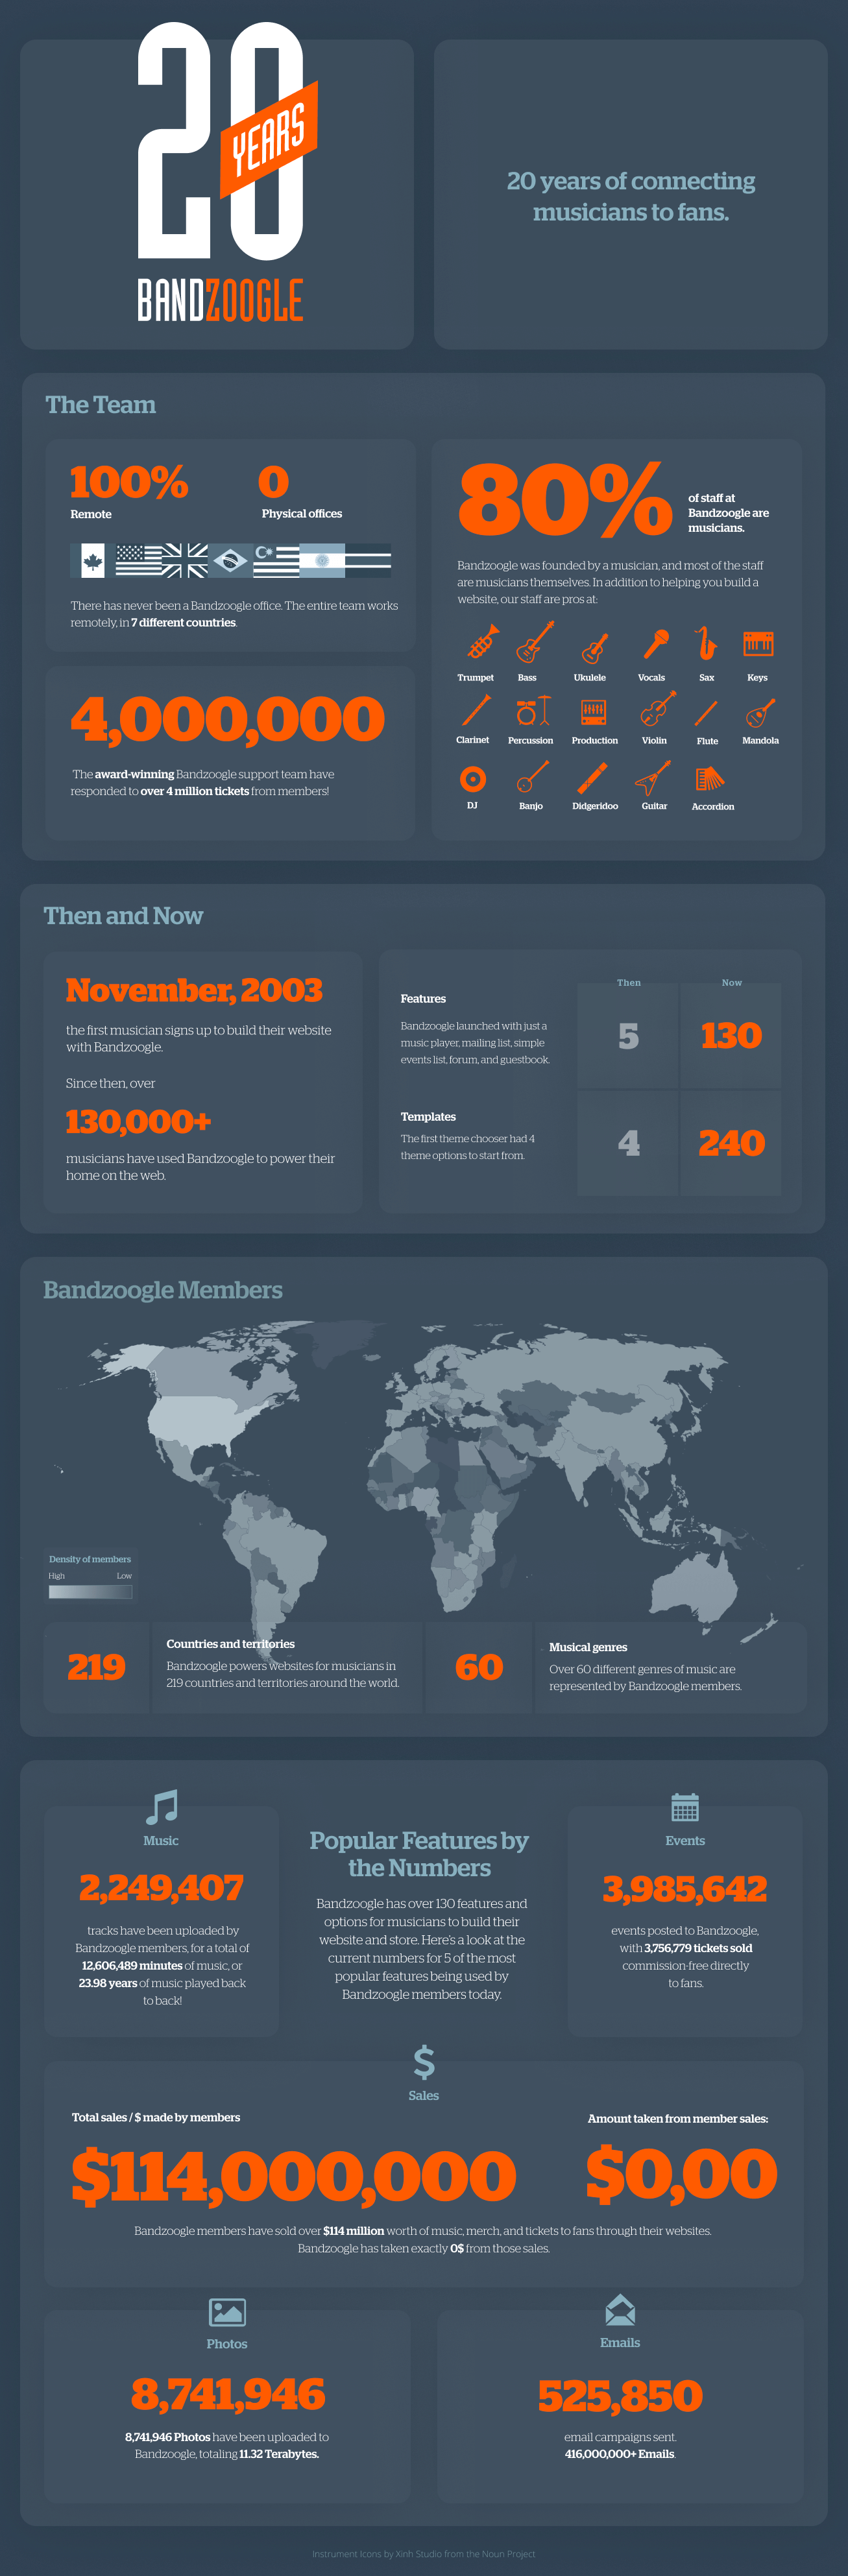 Infographic listing various details of Bandzoogle's service over 20 years